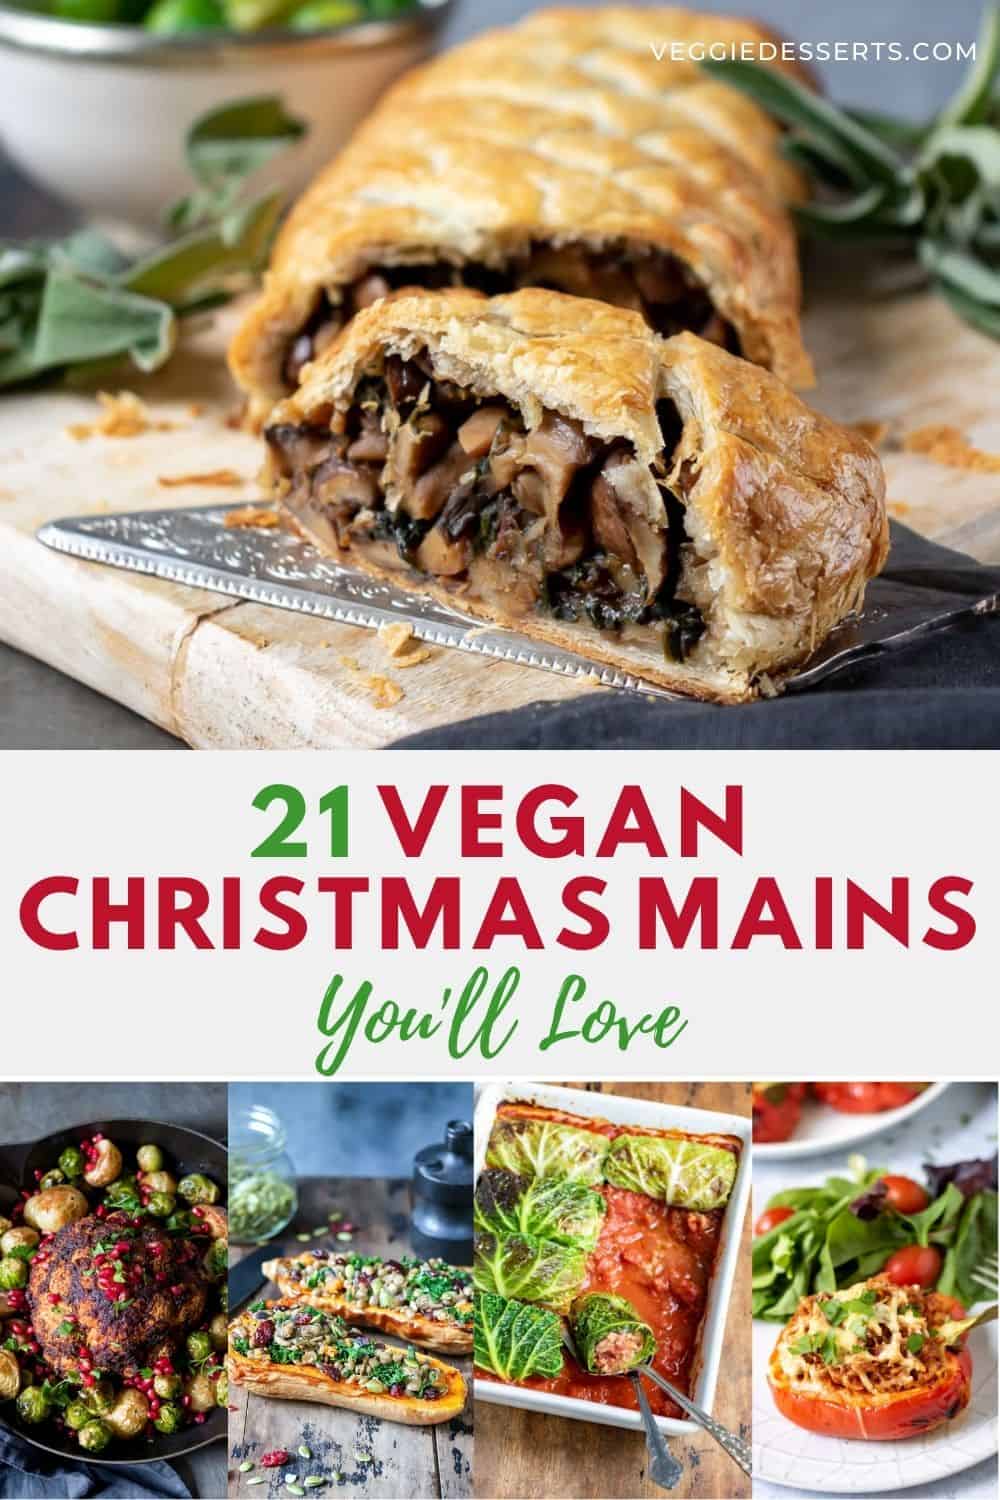 Collage of recipes, with text: 21 Vegan Christmas Mains You'll Love.